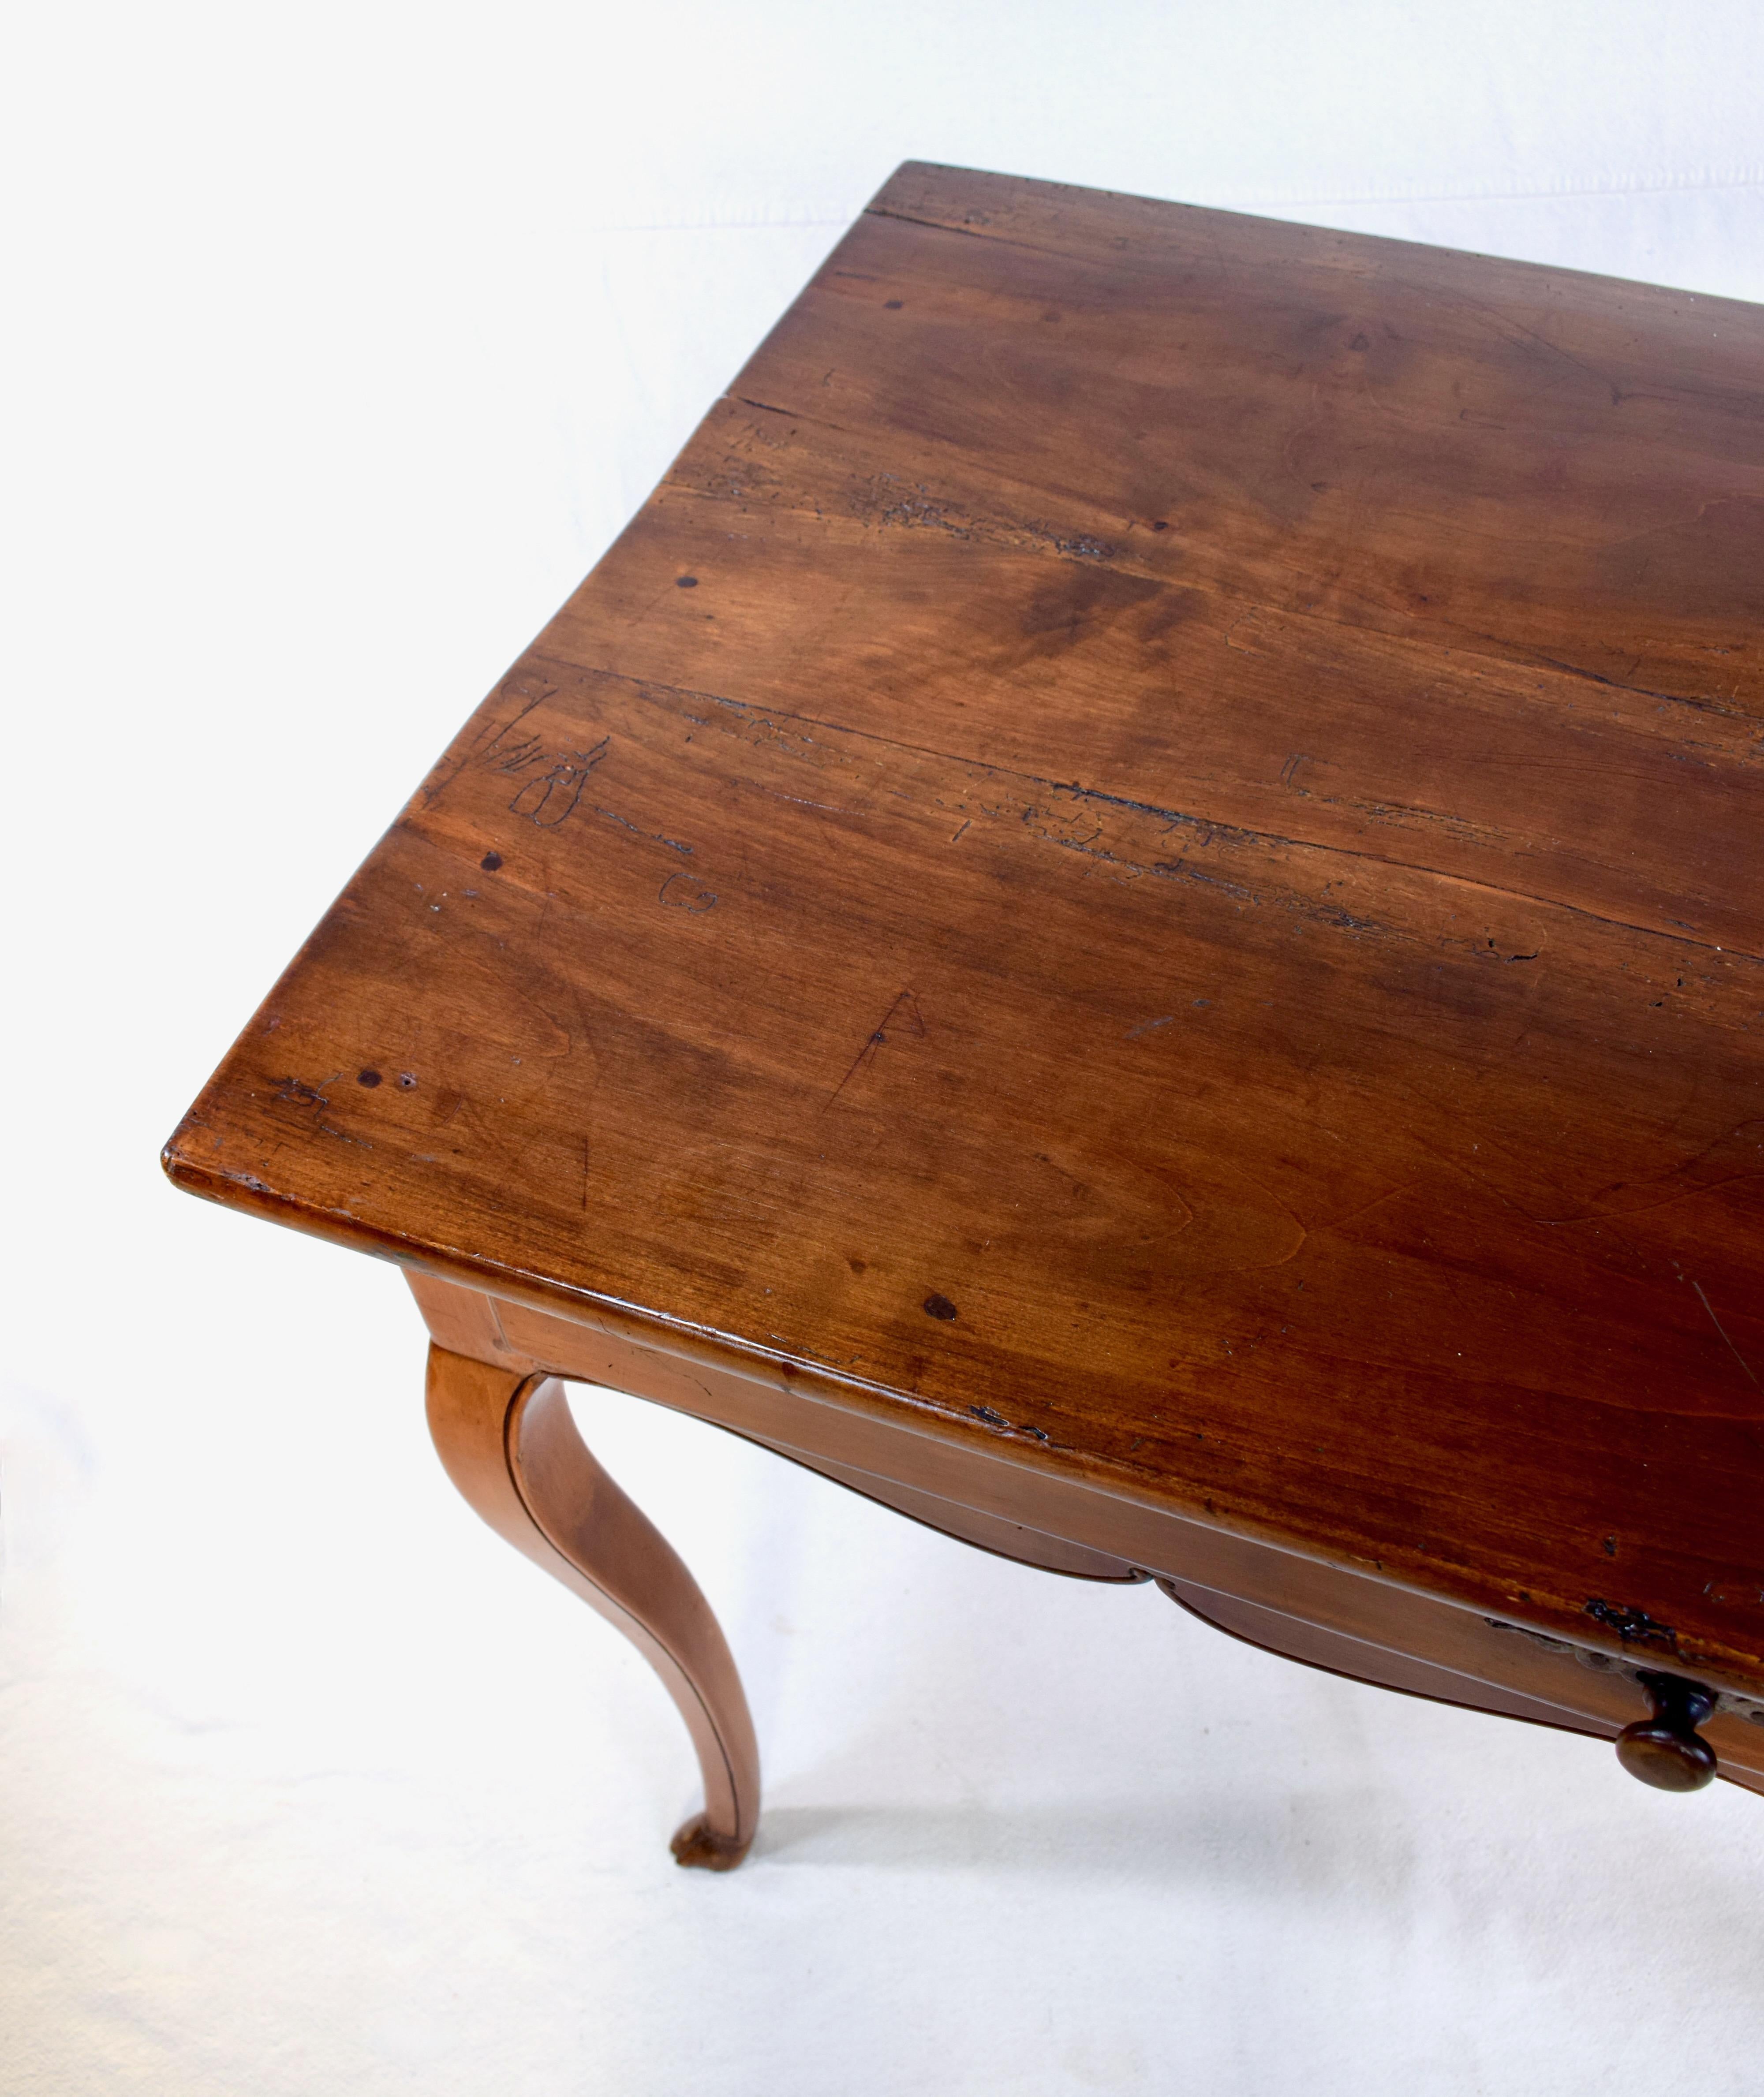 French Mid-18th Century Louis XV Period Petit Desk or Side Table For Sale 5